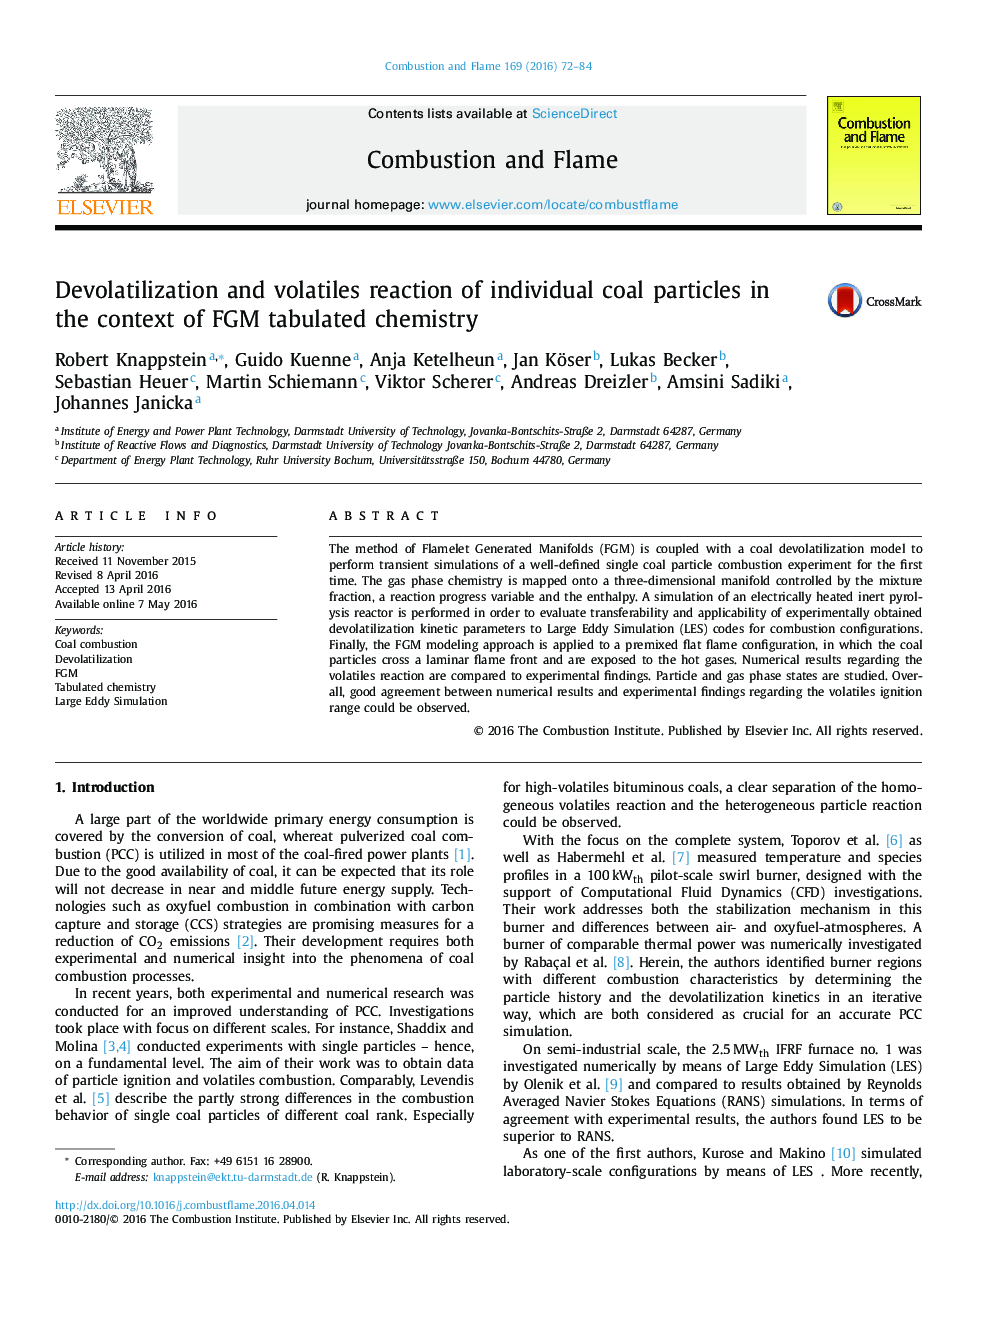 Devolatilization and volatiles reaction of individual coal particles in the context of FGM tabulated chemistry